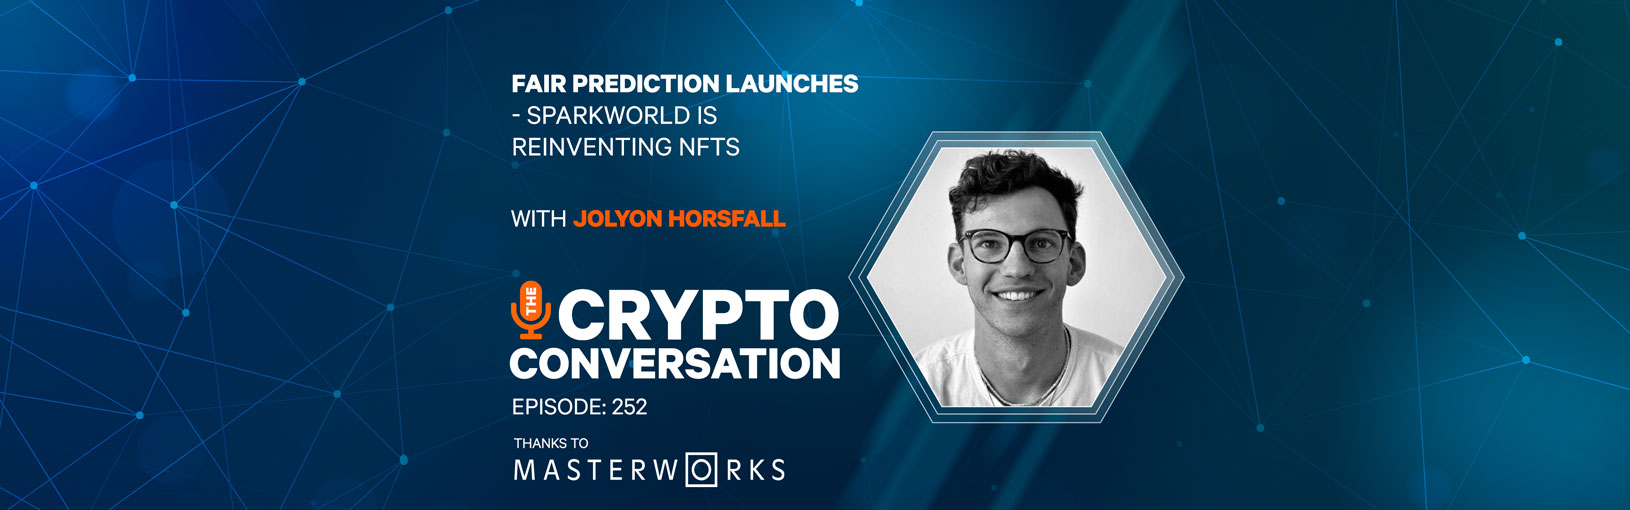 Fair Prediction Launches – SparkWorld is reinventing NFTs